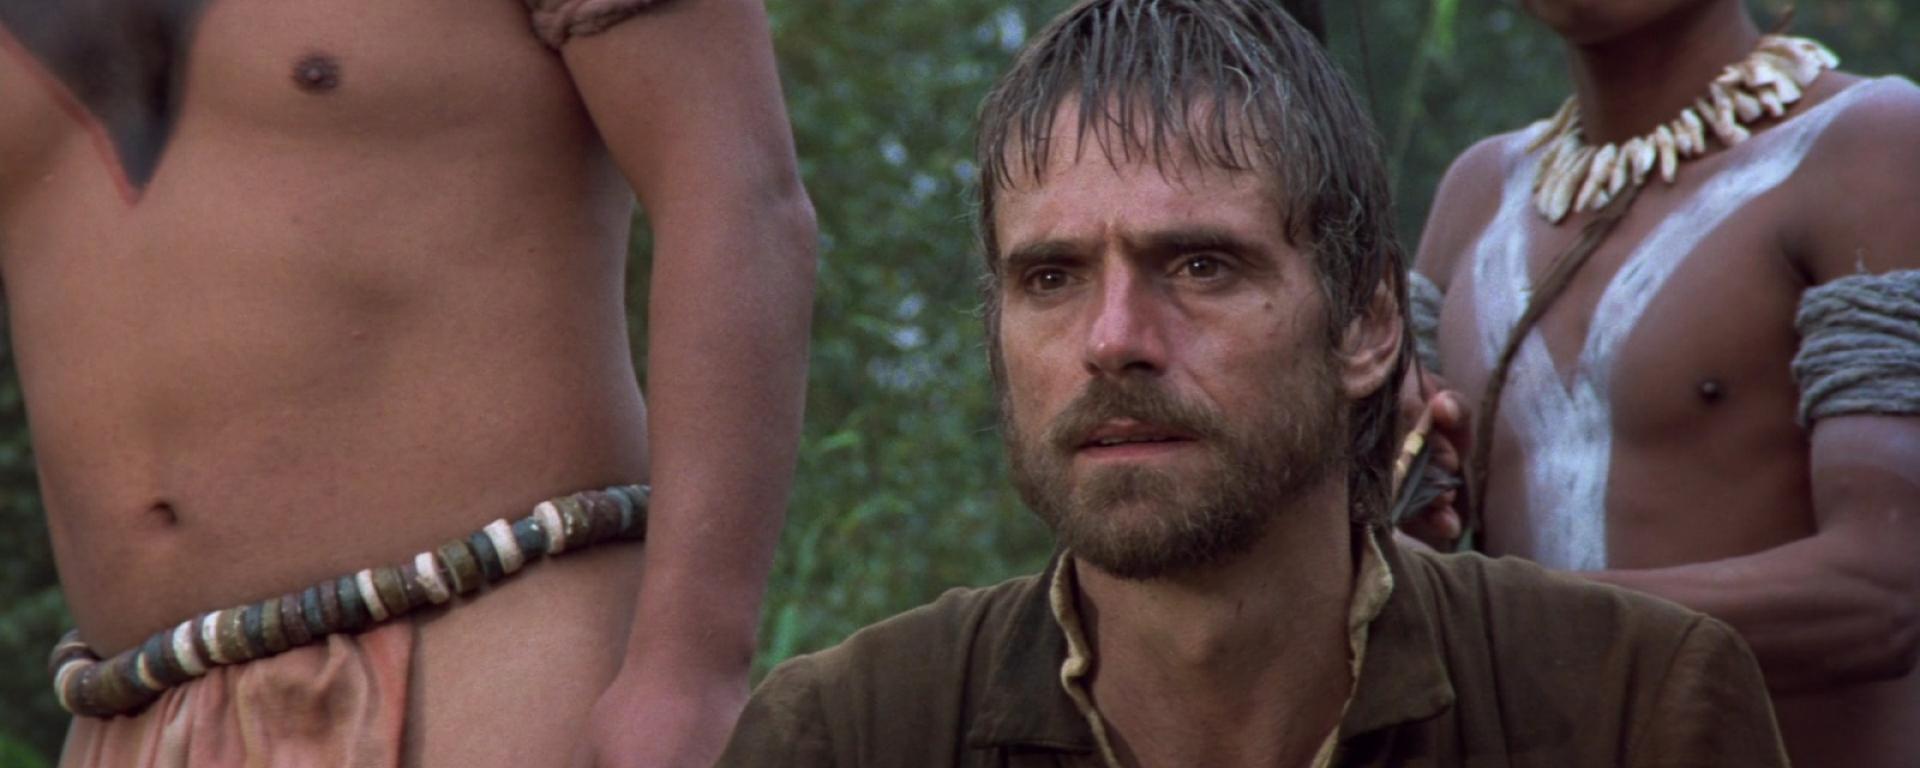 Jeremy Irons in 1986’s ‘The Mission’ / Warner Bros.